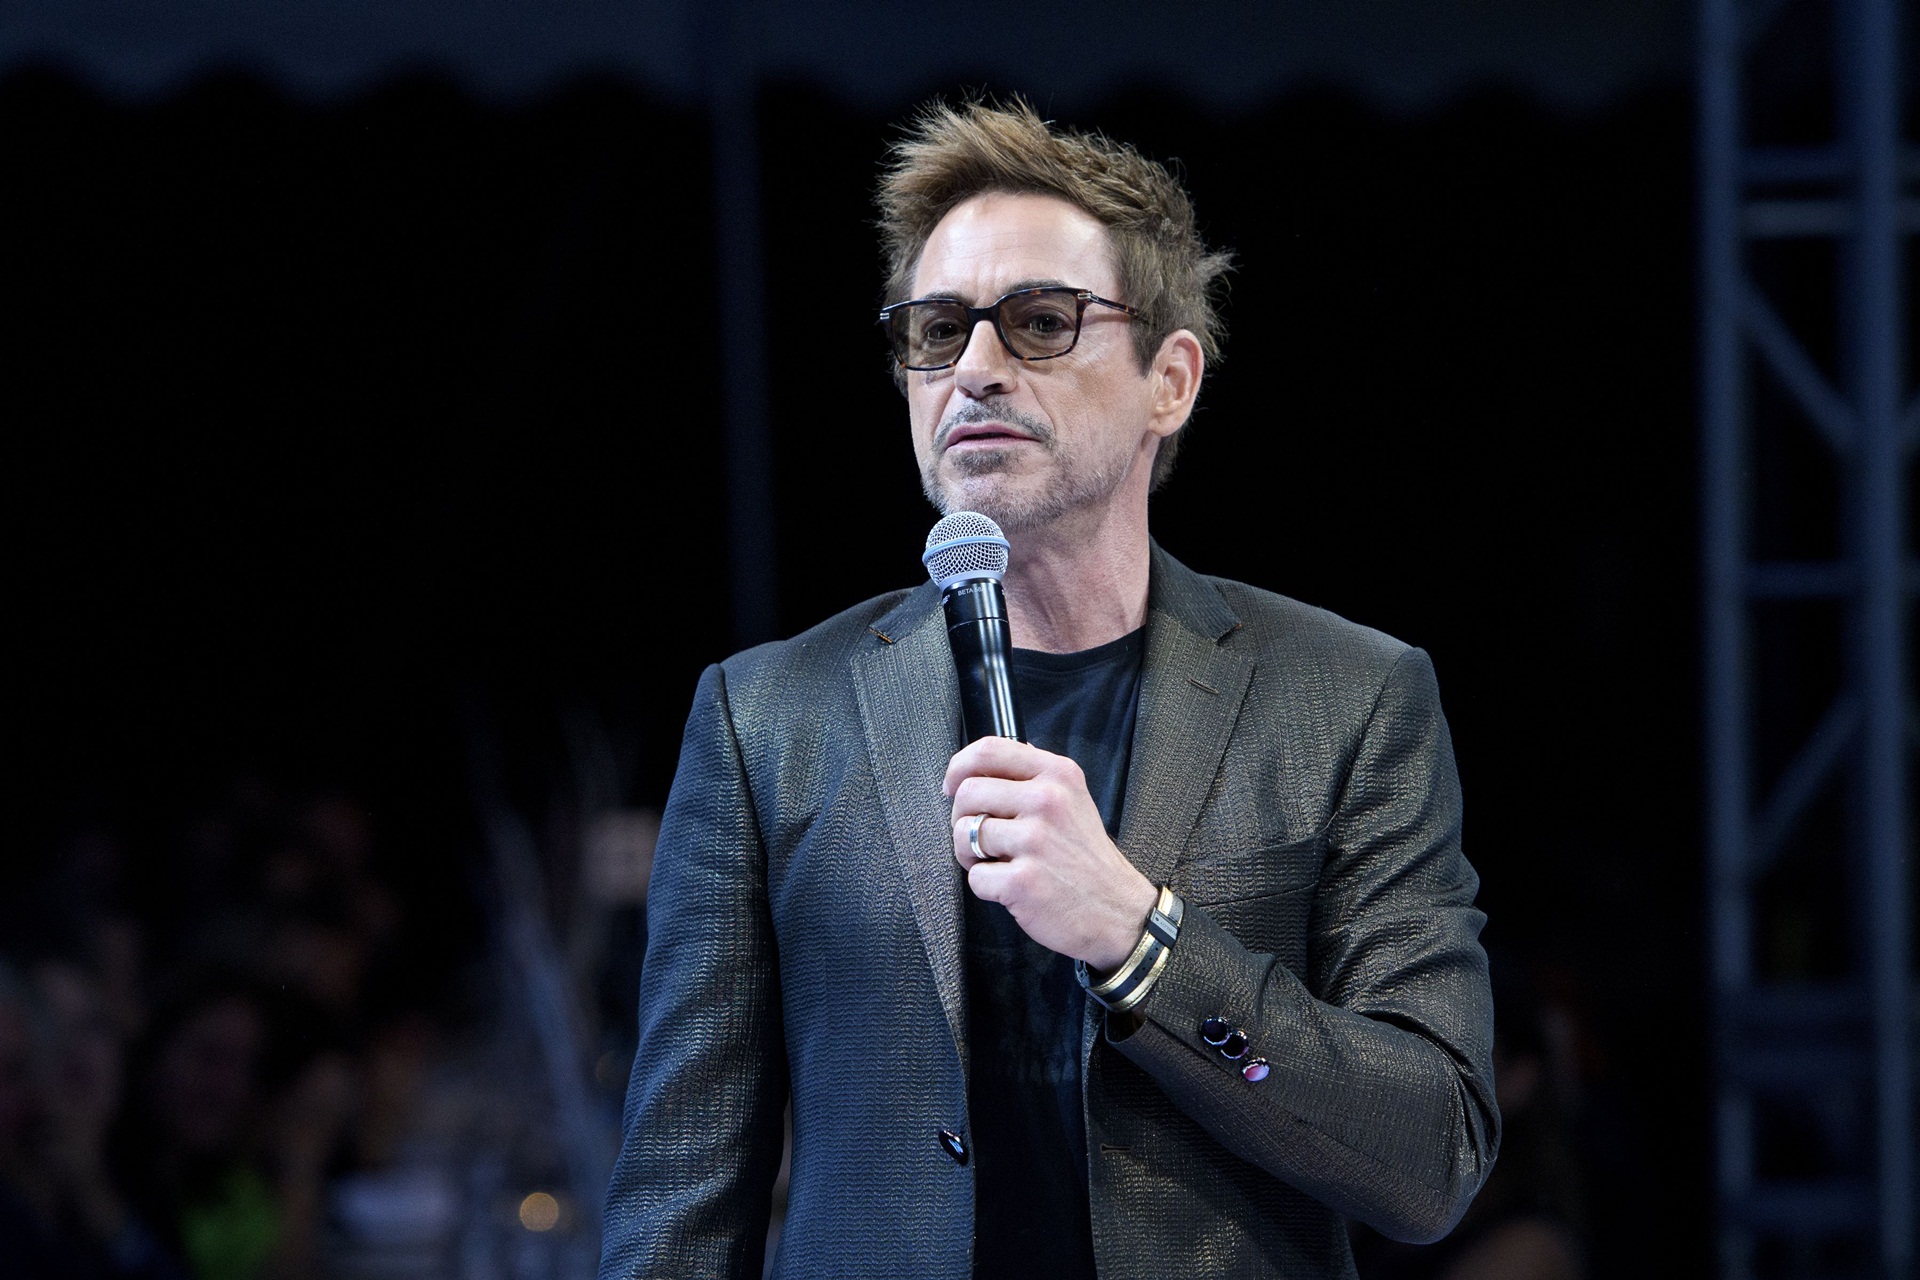 Robert Downey Jr Wallpapers posted by Ethan Walker